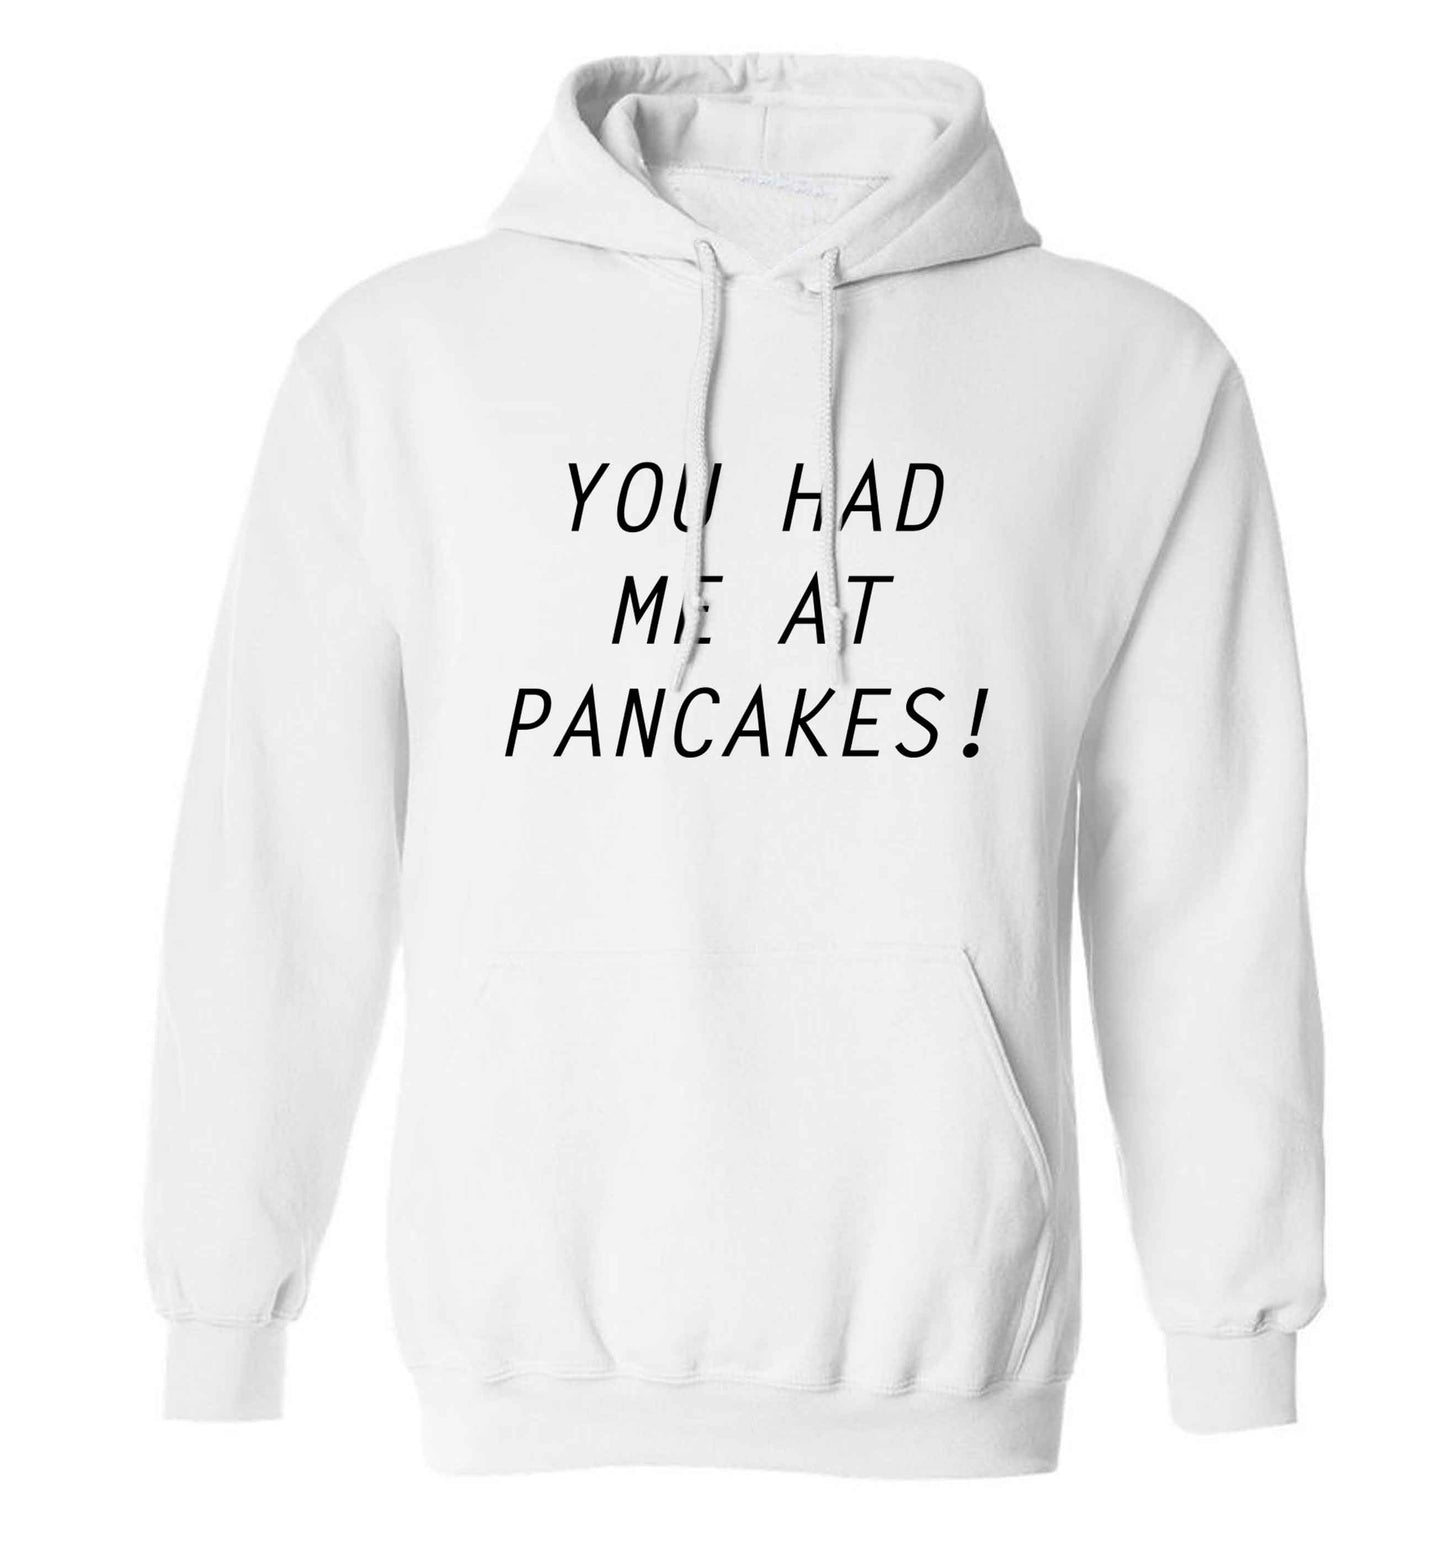 You had me at pancakes adults unisex white hoodie 2XL